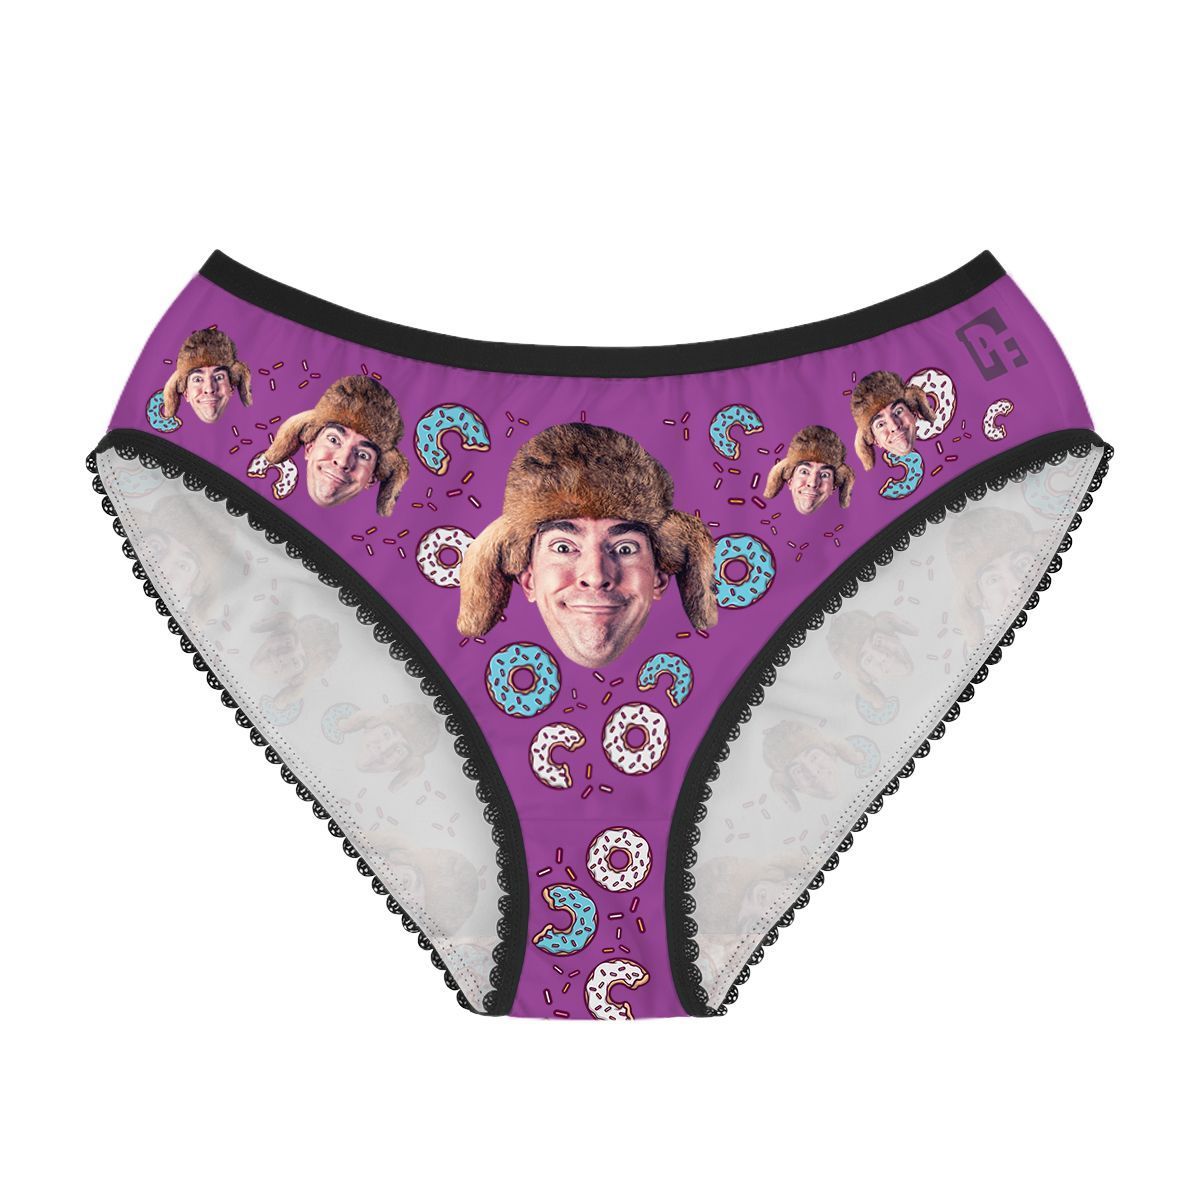 Purple Donuts women's underwear briefs personalized with photo printed on them